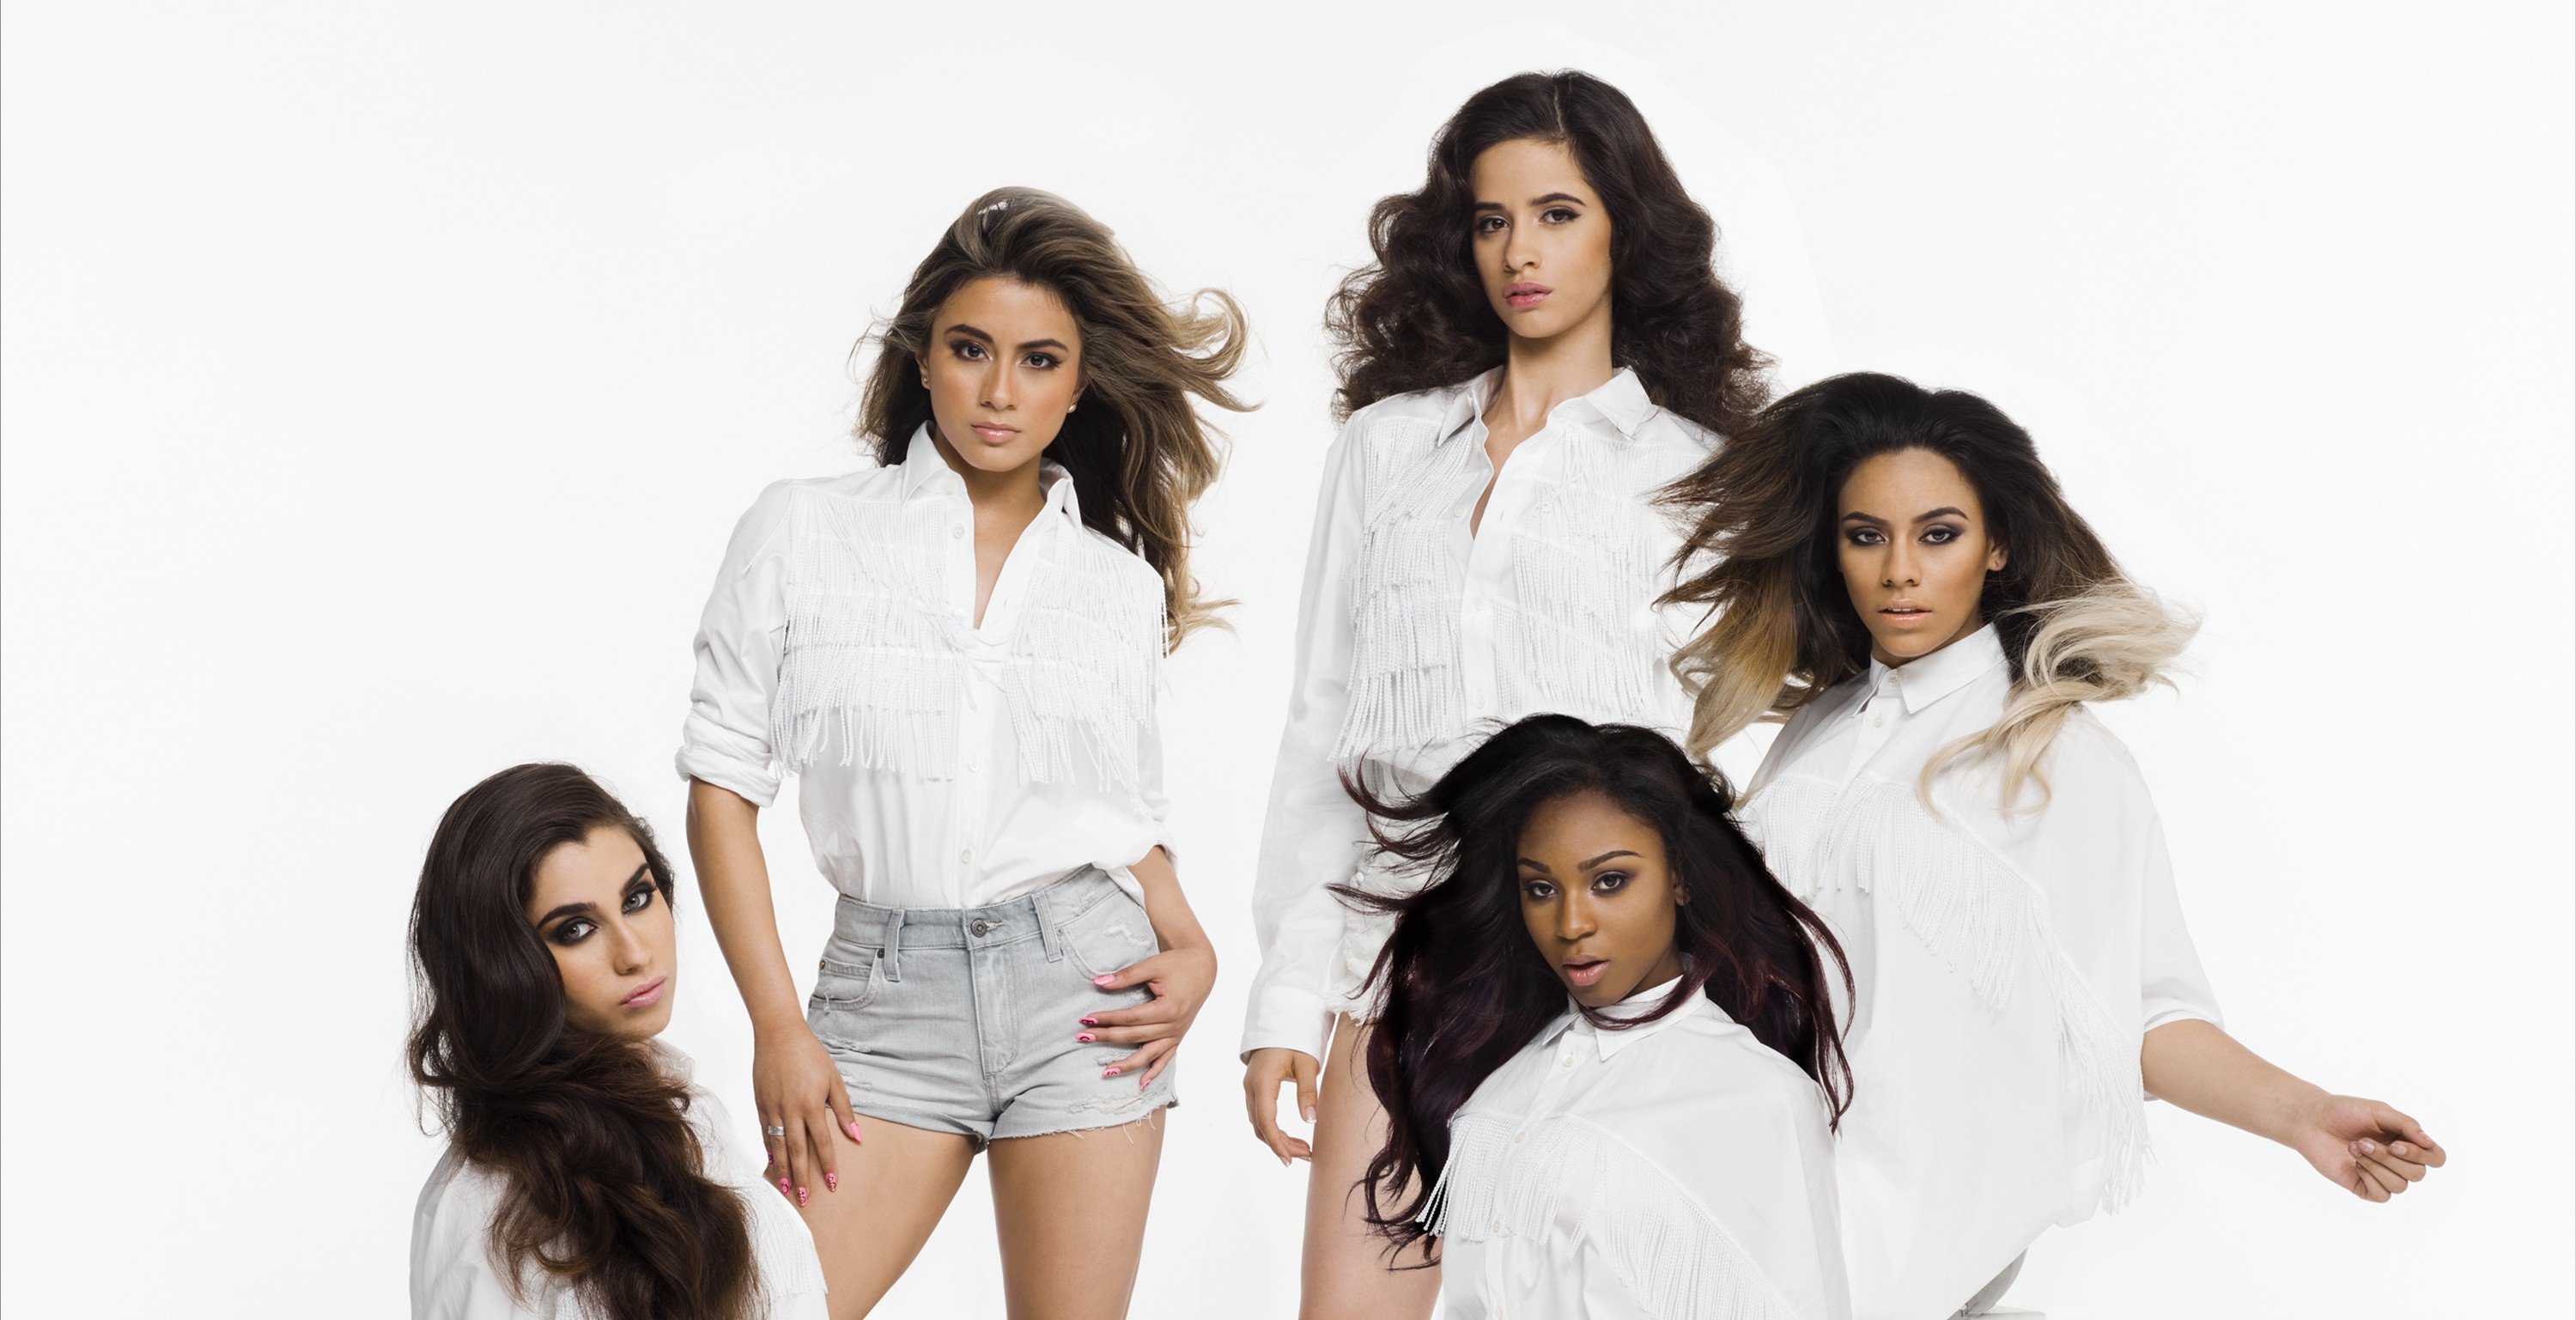 FIFTH HARMONY RELEASE NEW SINGLE AND VIDEO ‘WORK FROM HOME’